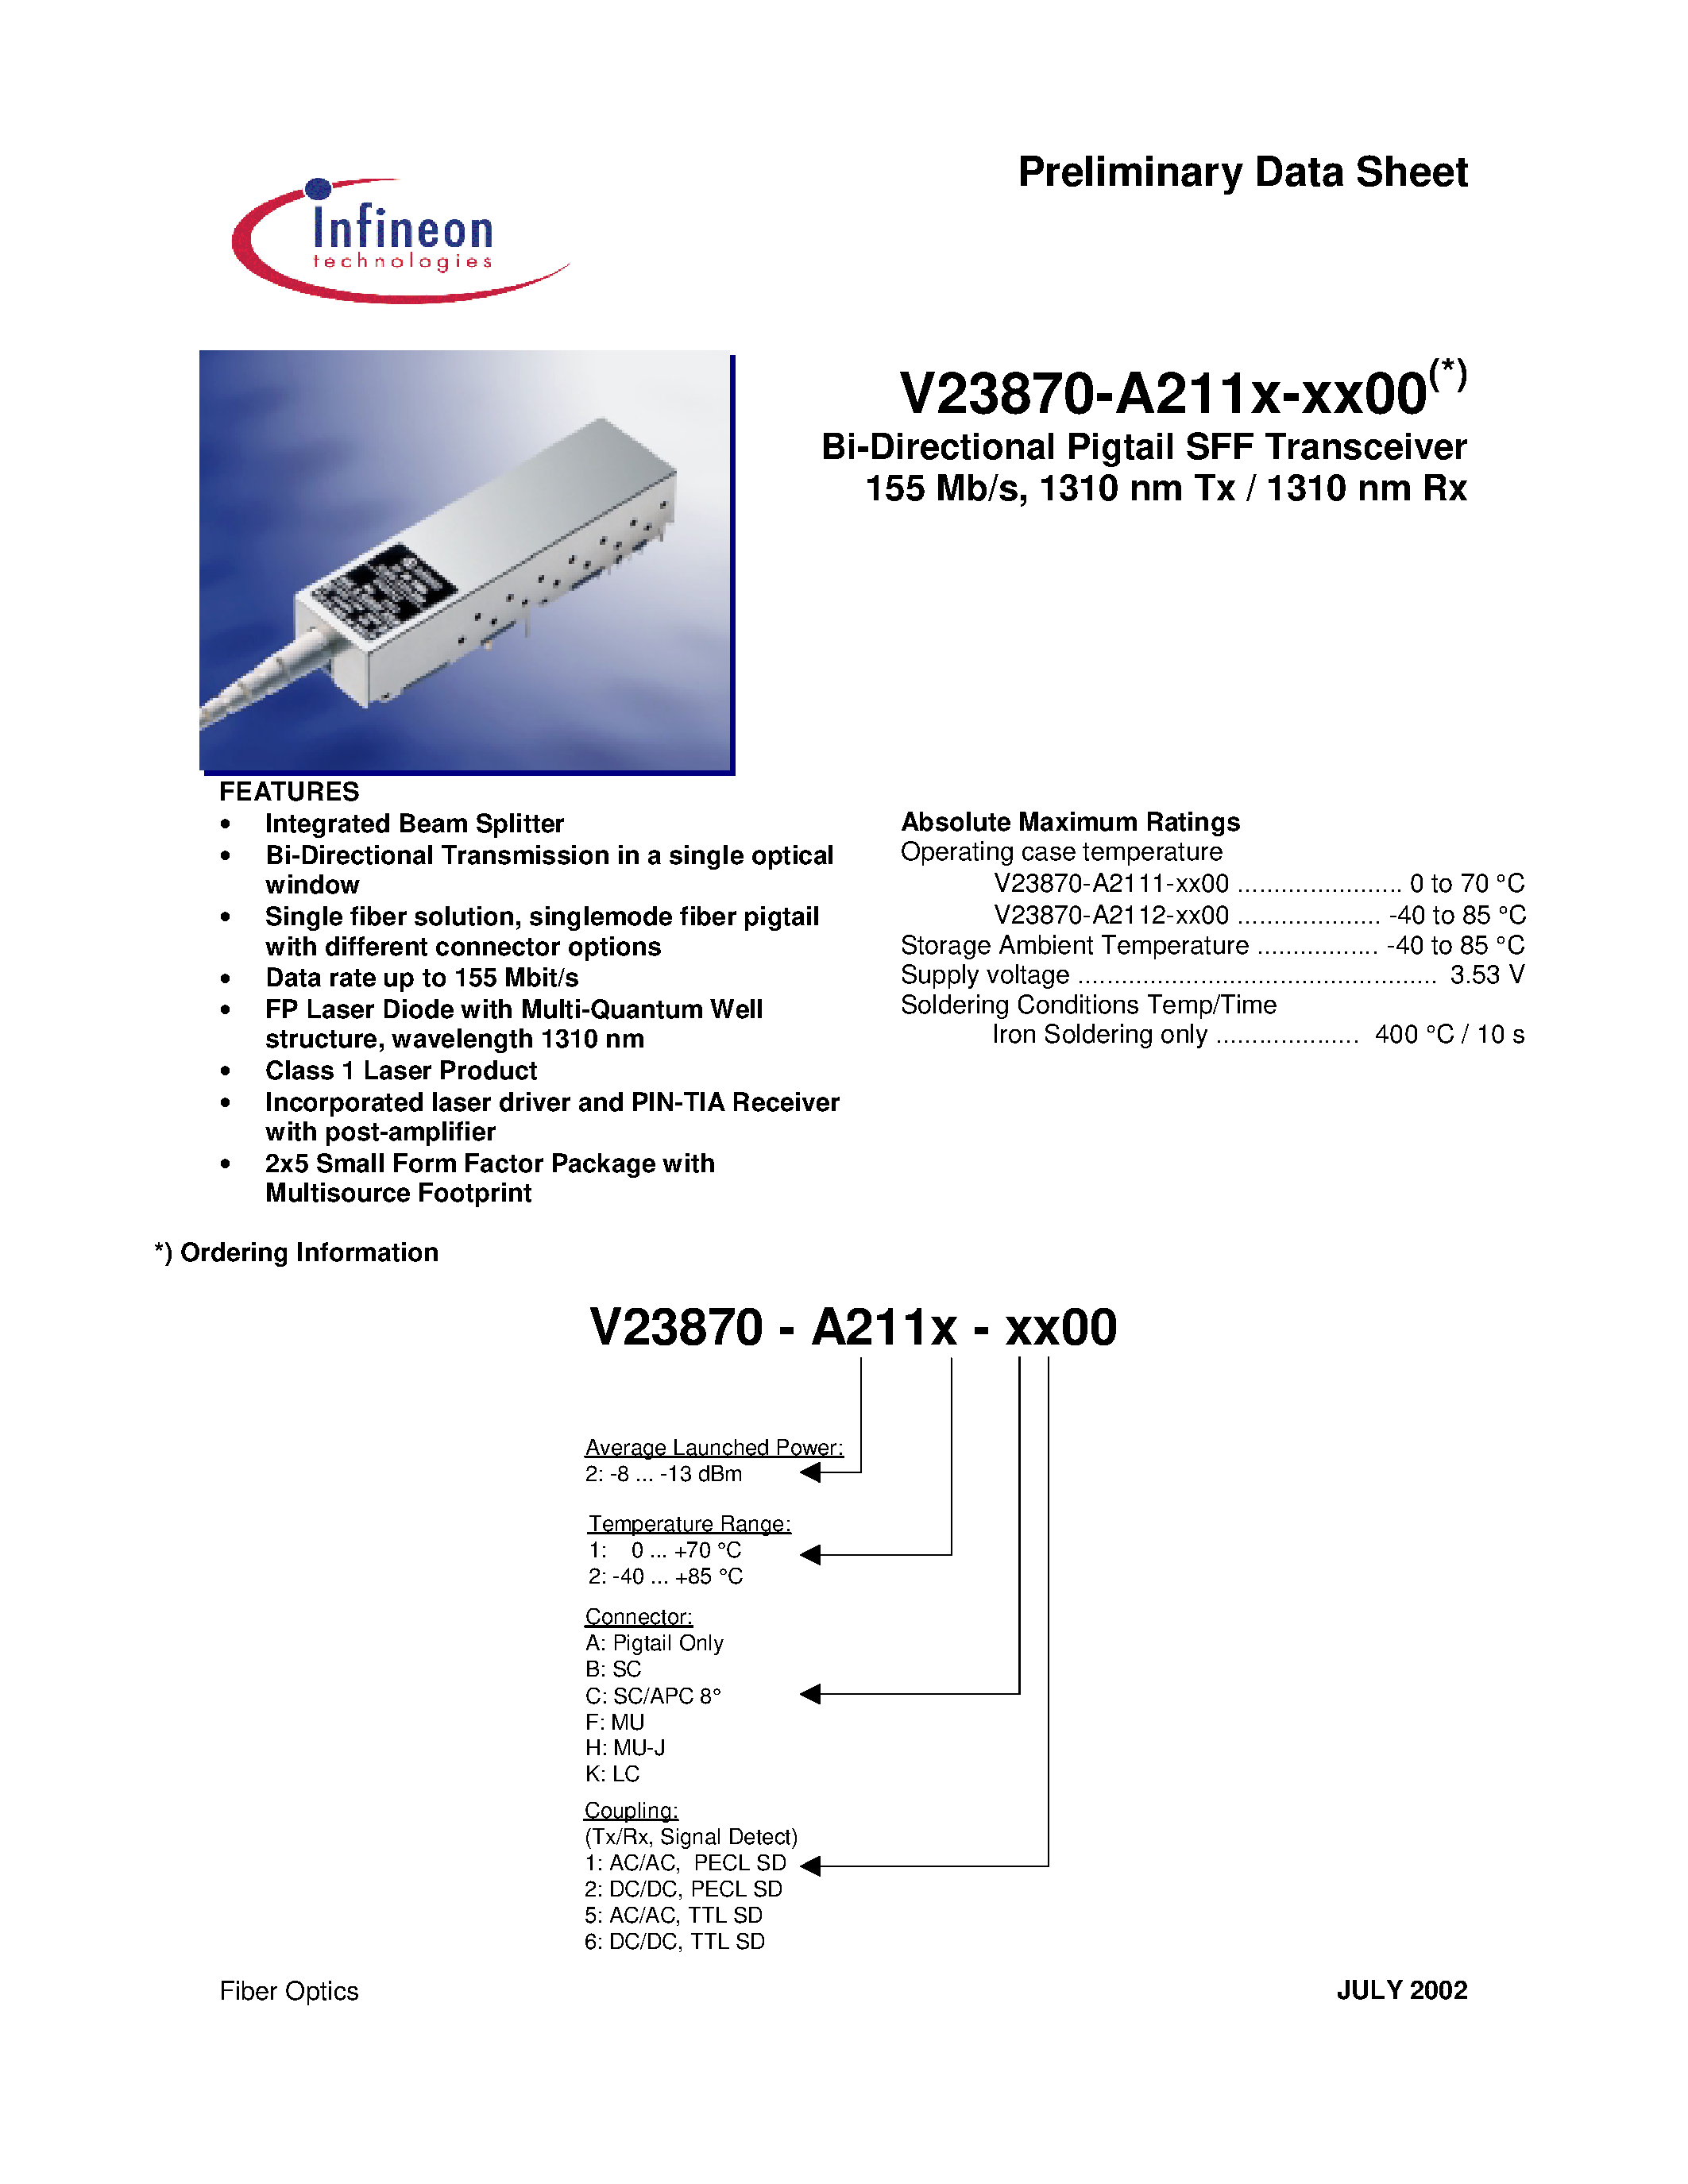 Datasheet V23870-A2112-H100 - Bi-Directional Pigtail SFF Transceiver 155 Mb/s/ 1310 nm Tx / 1310 nm Rx page 1